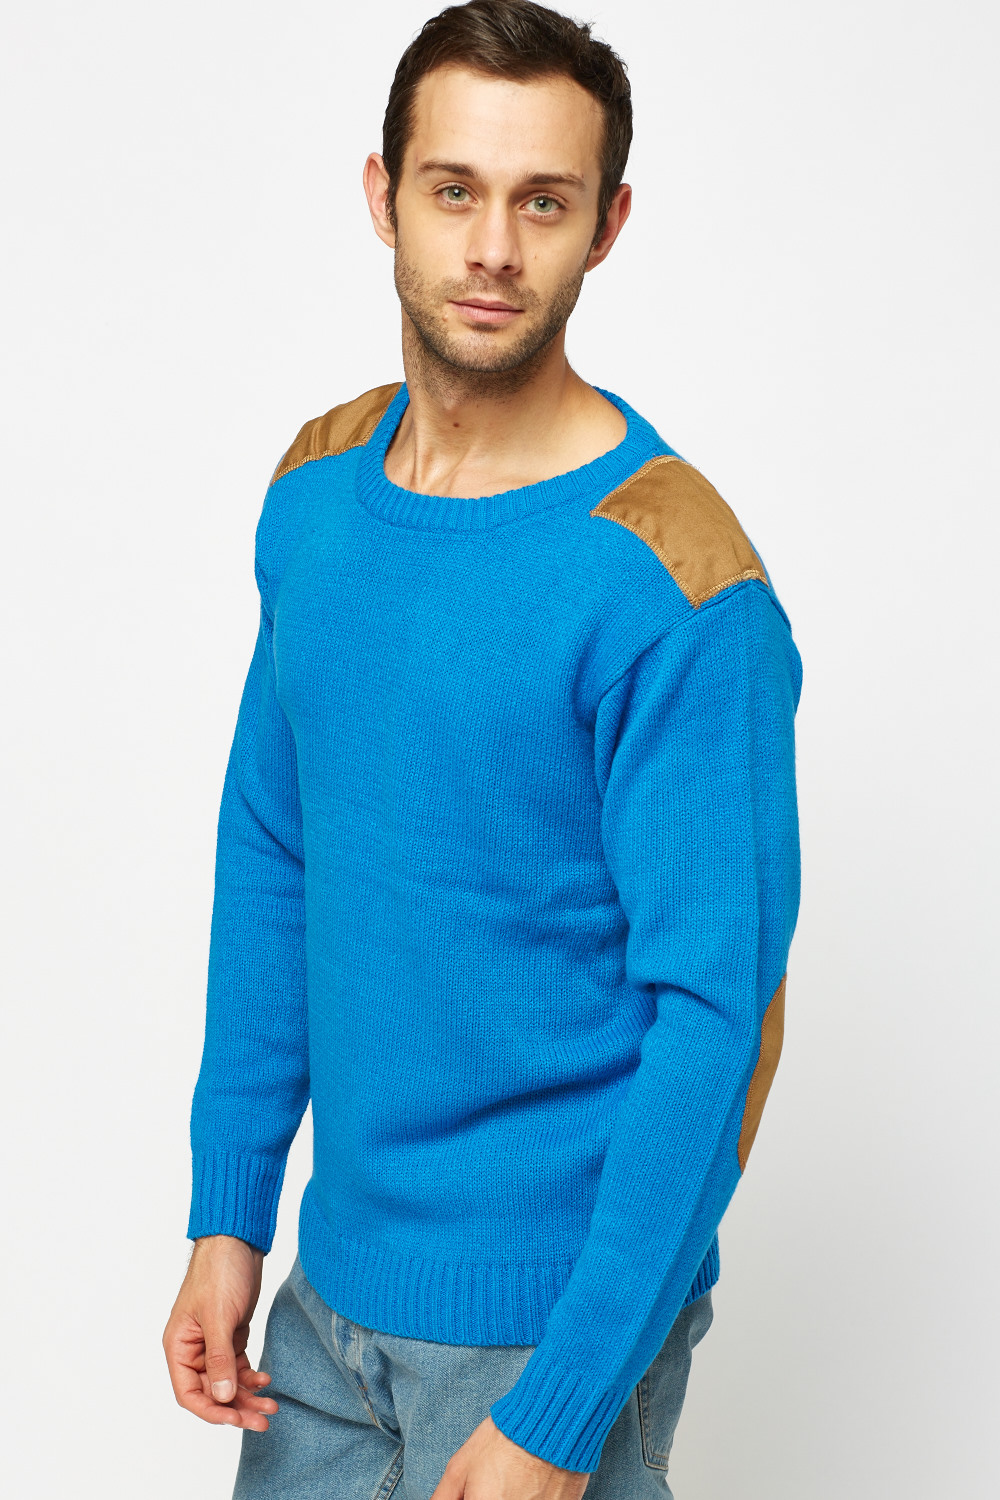 Insert Contrast Knitted Jumper - Just $7